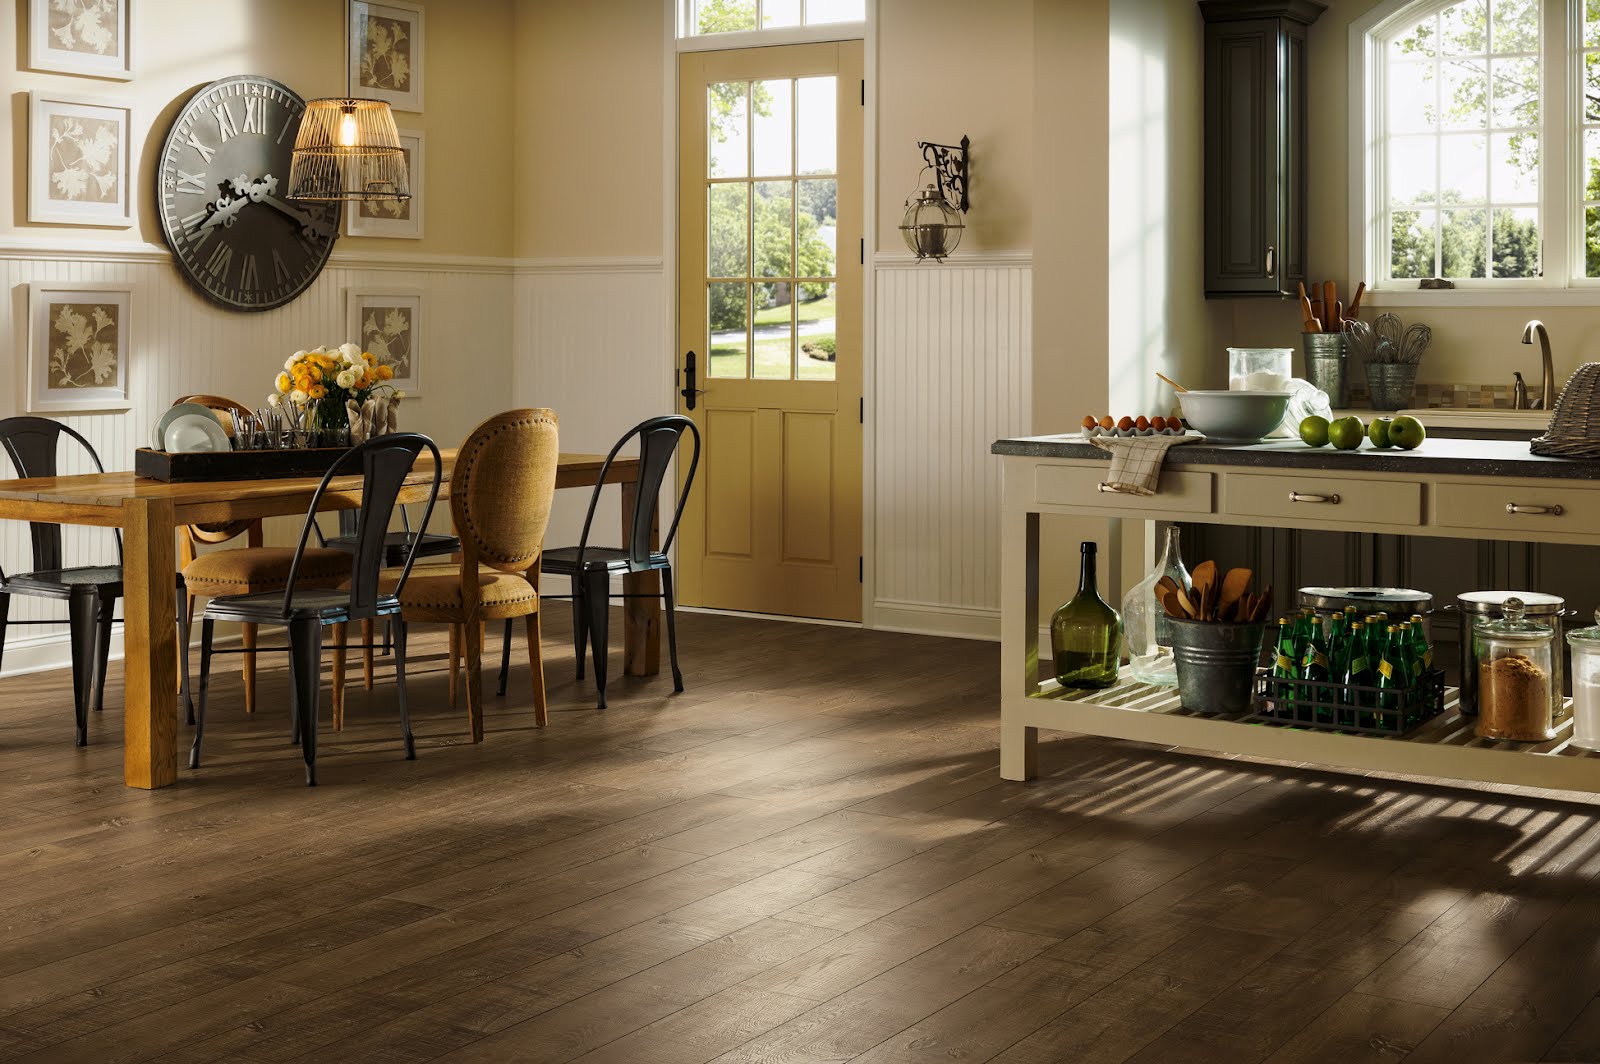 Install How To Install Laminate Flooring? A Complete Guide To Laminate Flooring